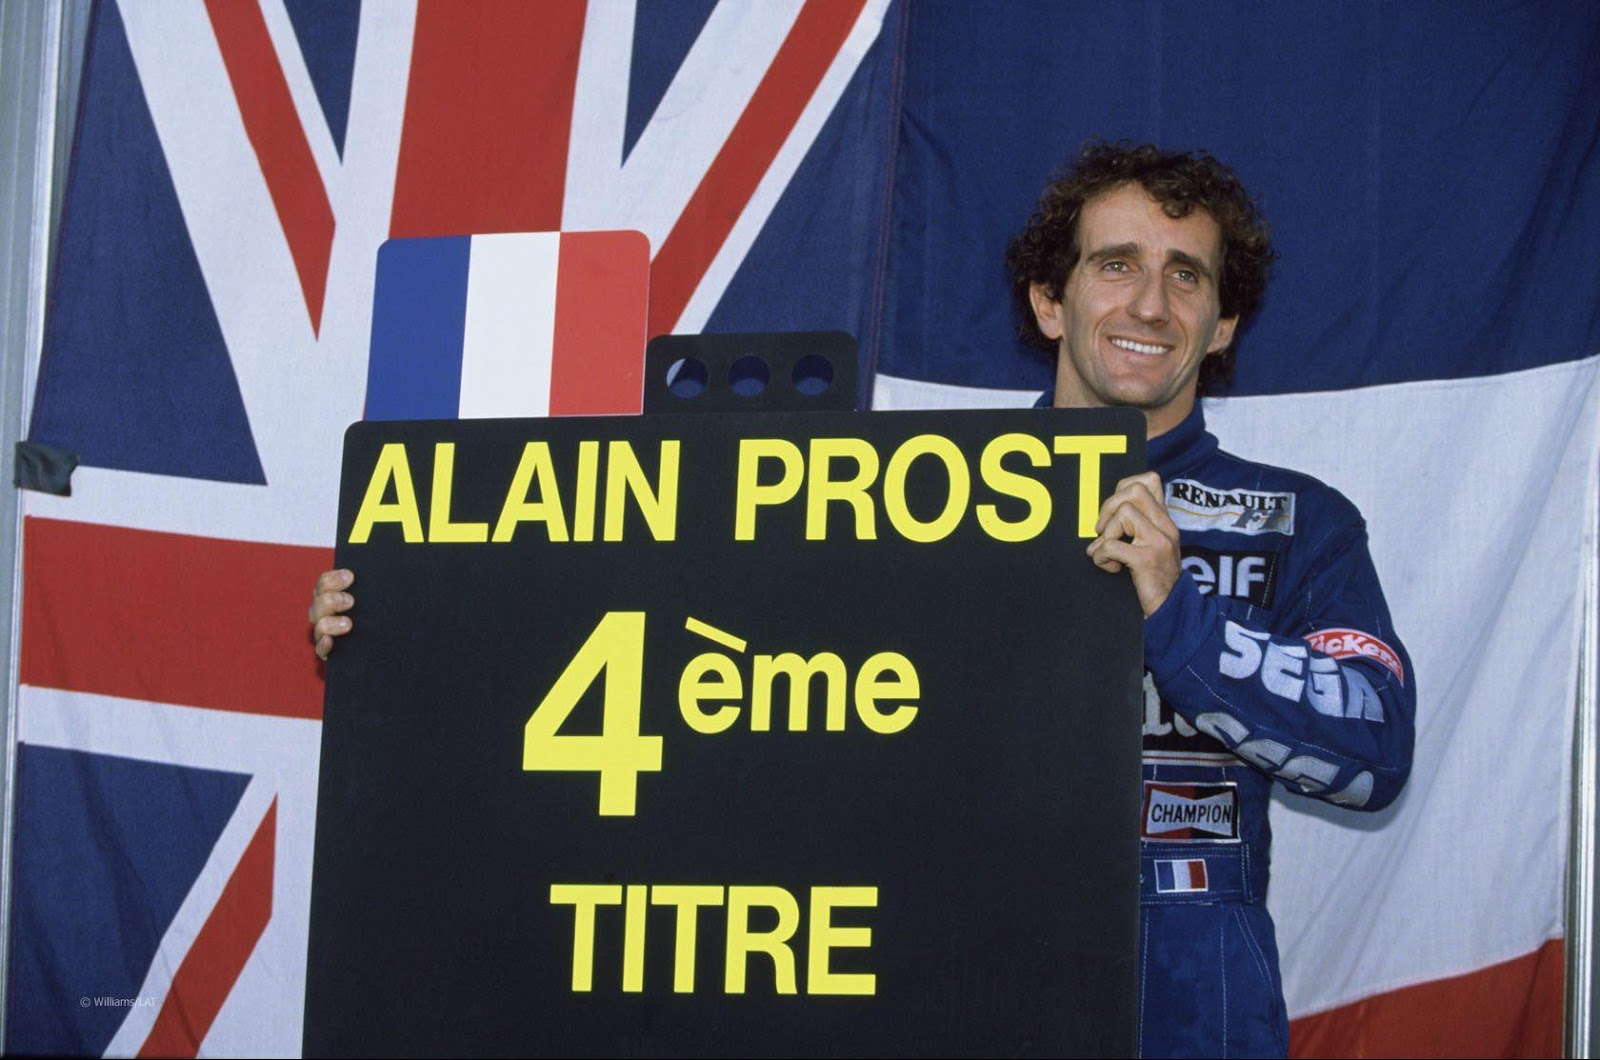 Alain Prost at Williams in 1993.